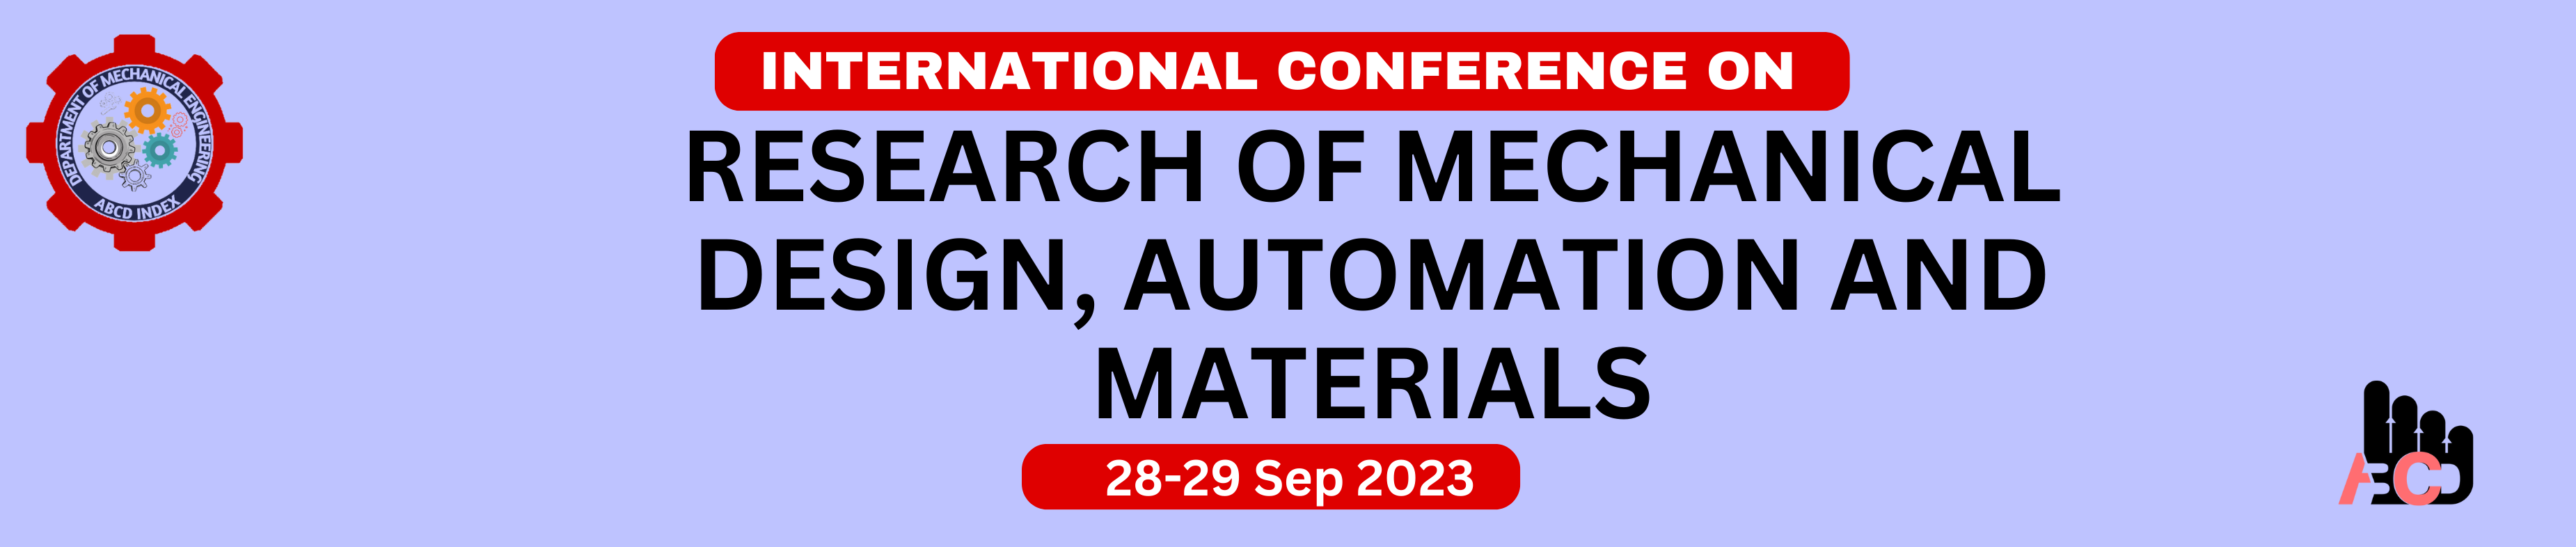 International conference on Research of Mechanical Design, Automation and Materials 2023, Bhopal, Madhya Pradesh, India